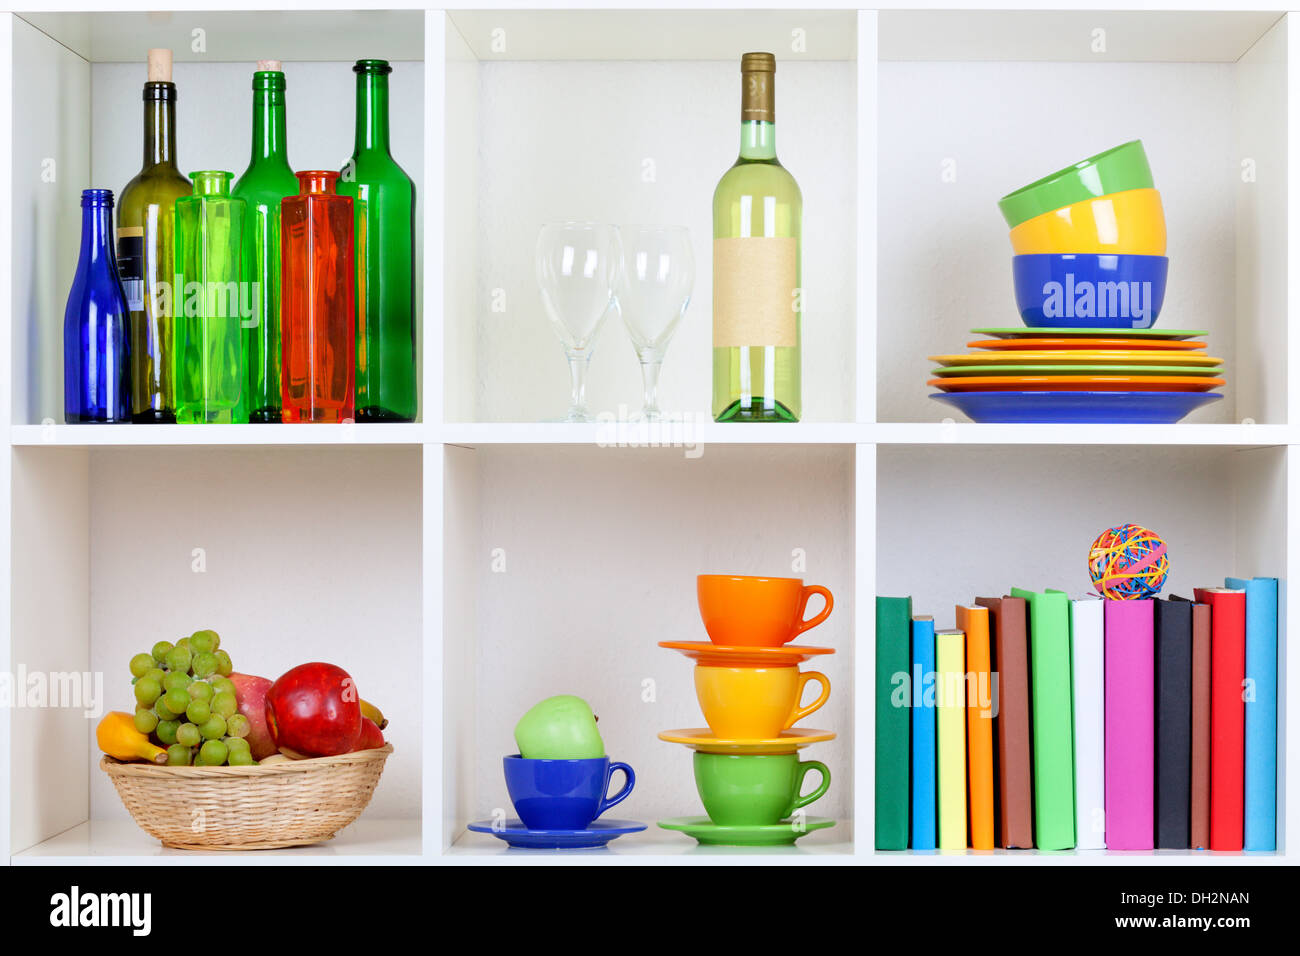 book shelf with bottles and books Stock Photo